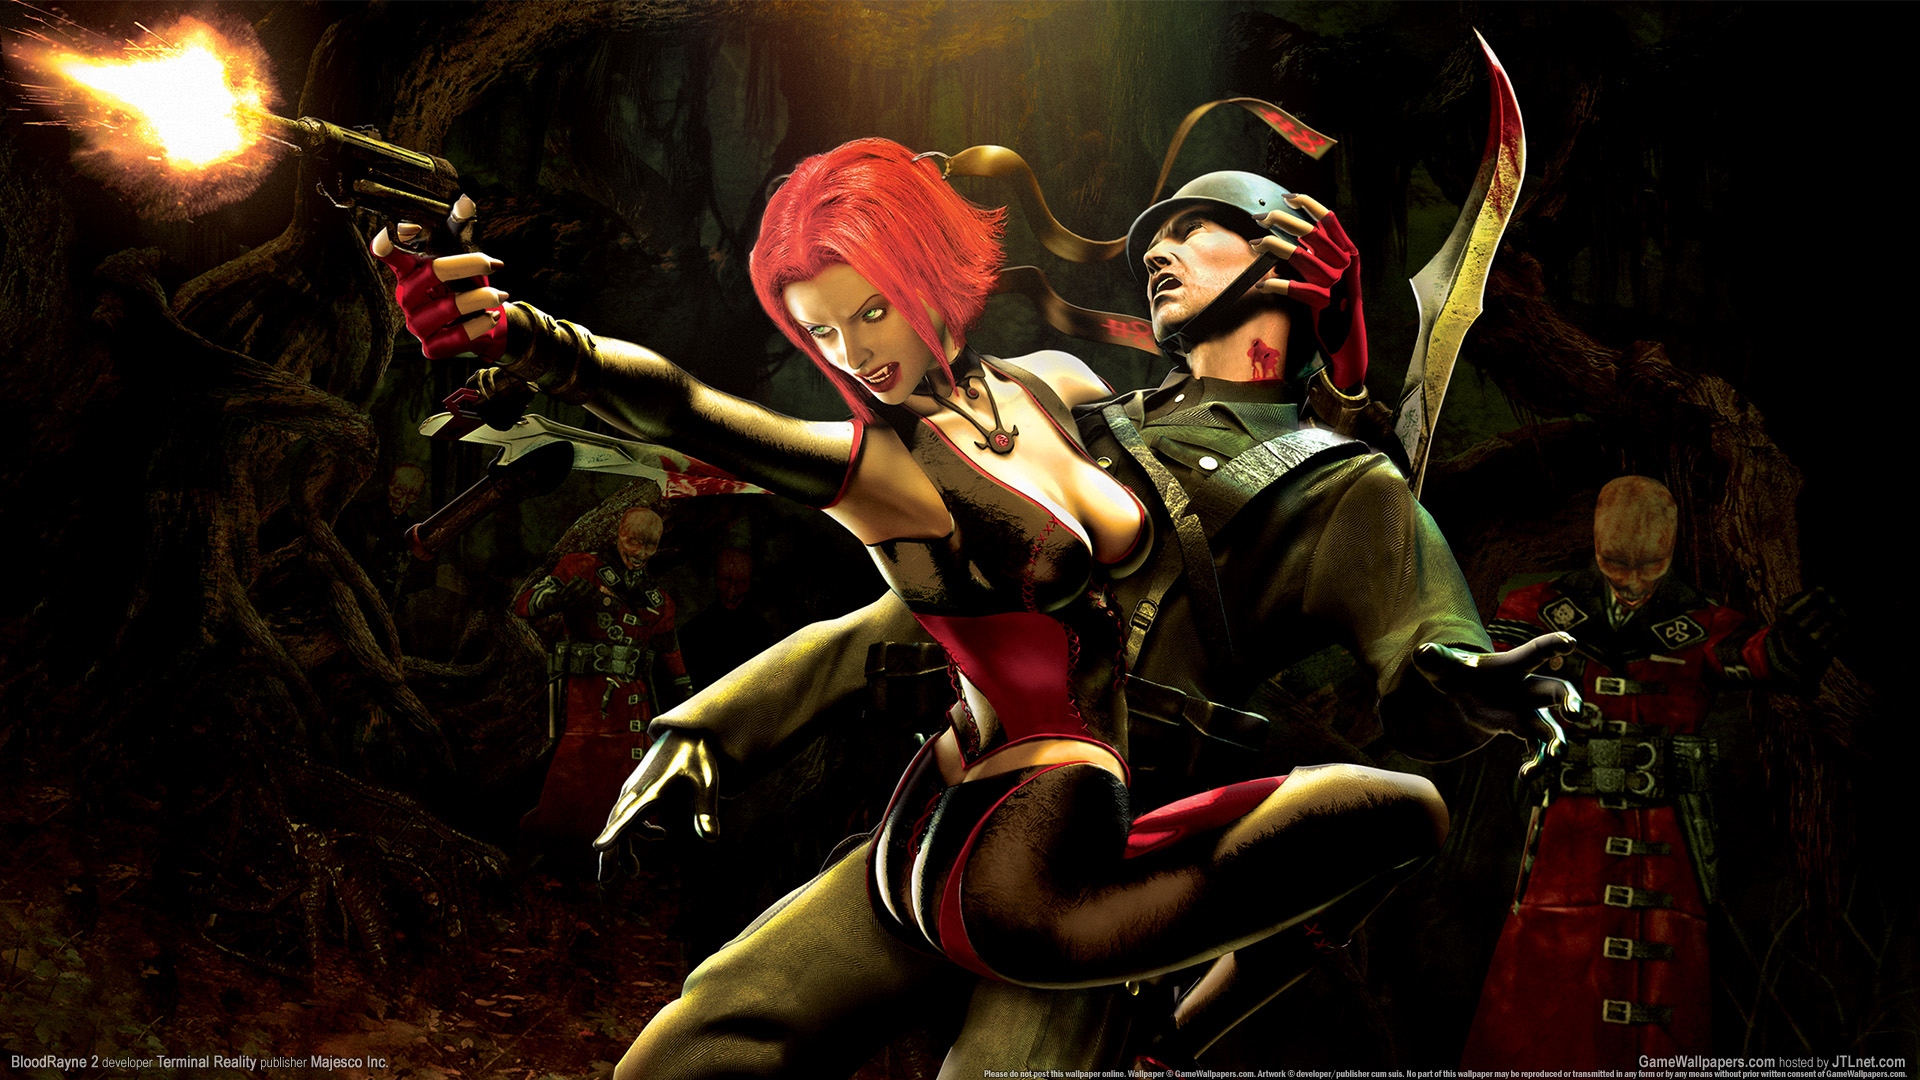 BloodRayne 2 1920x1080 wallpaper or background 09